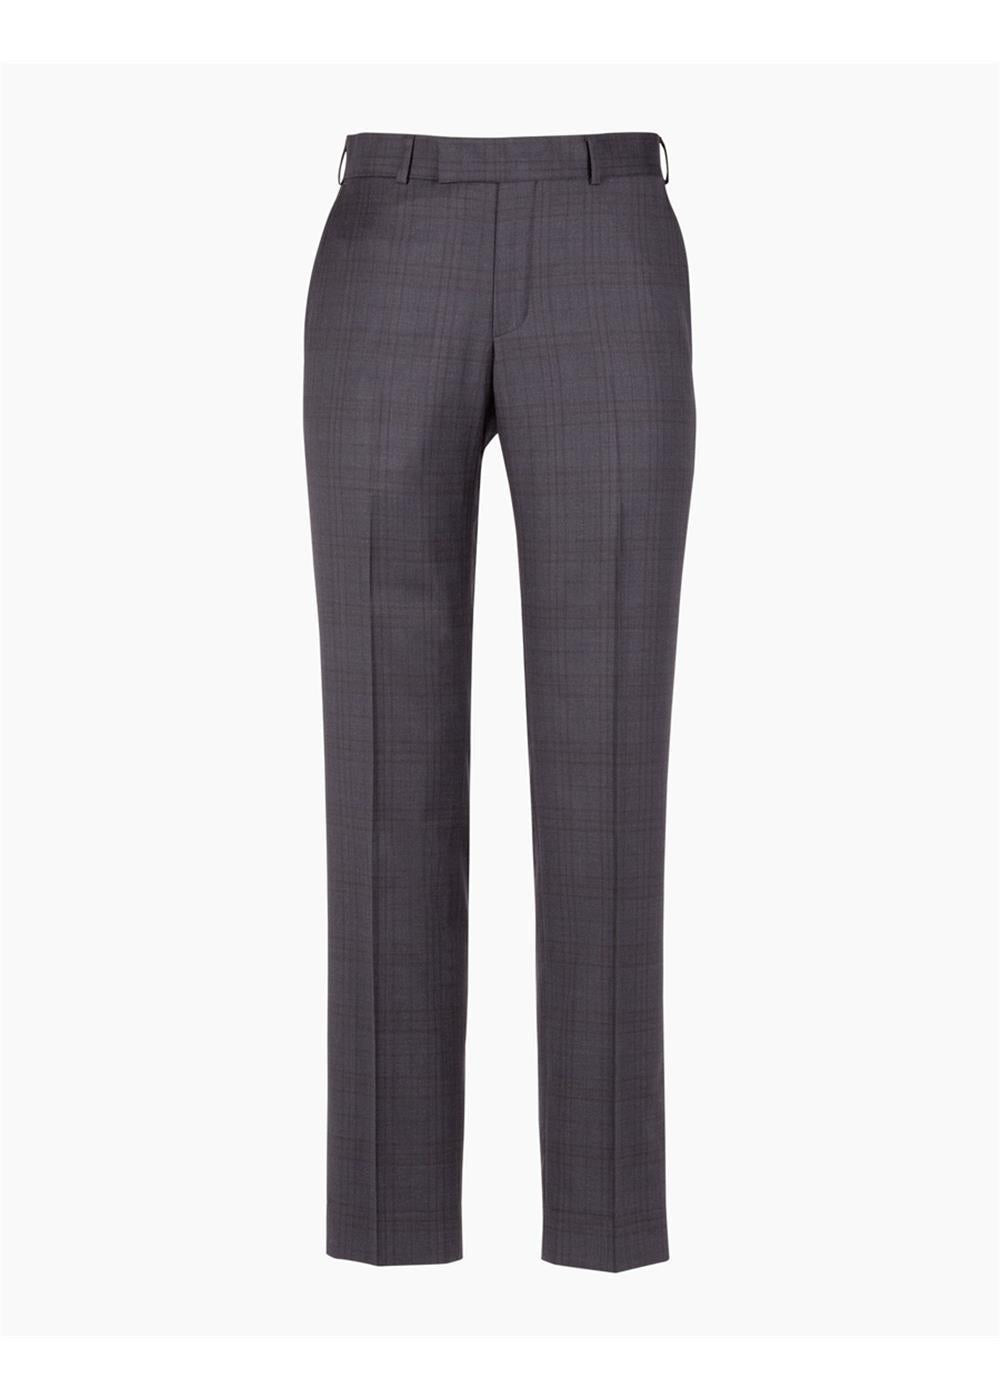 Rembrandt Cooper/Lotus Navy Two Trouser Suit